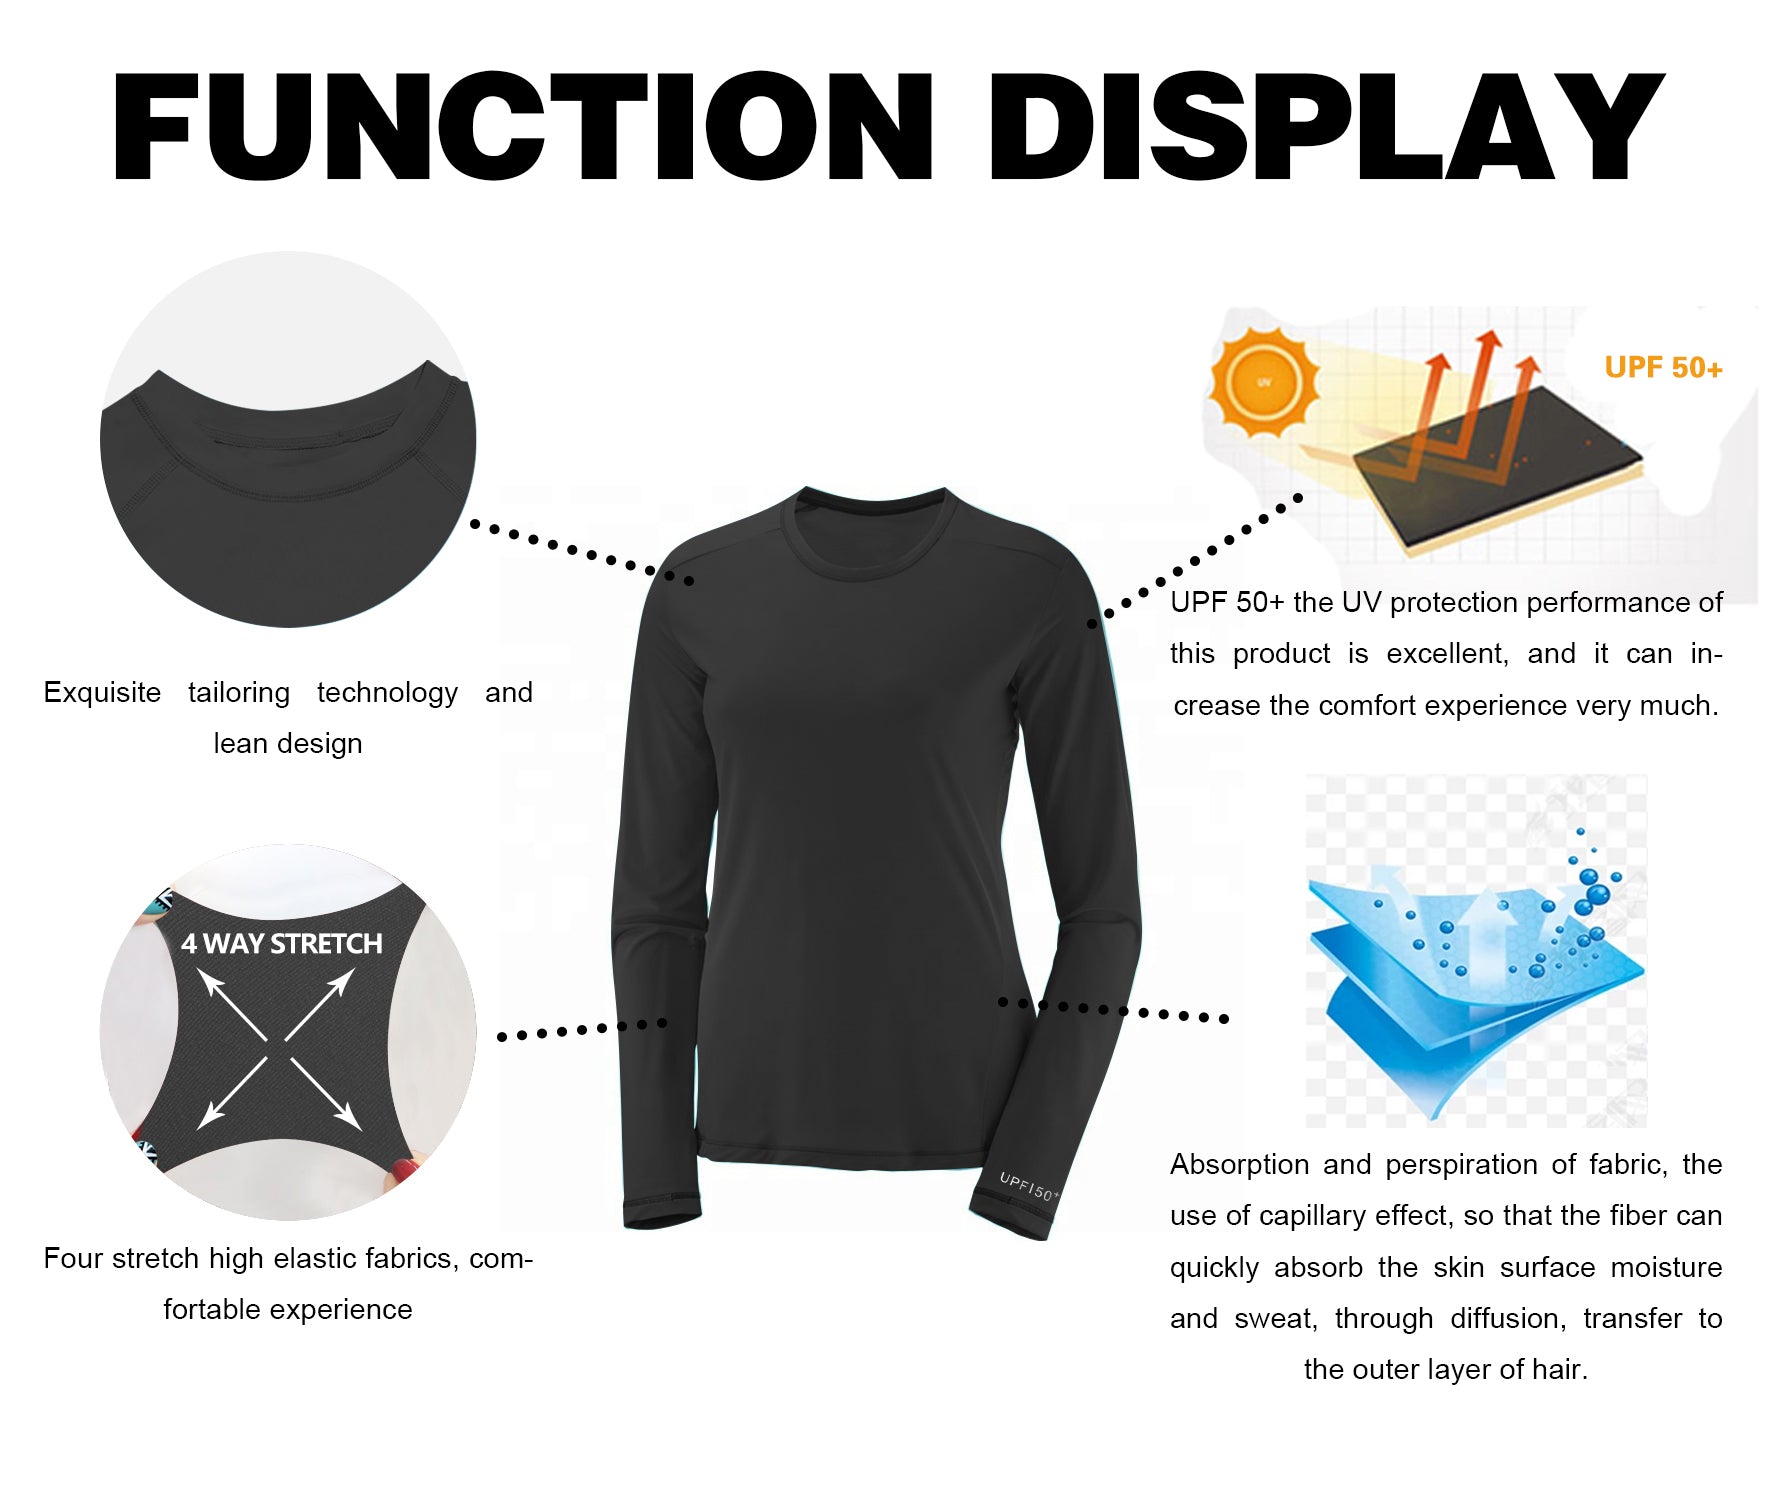 Long Sleeve UPF 50+ Rashguard blue 84%Polyester/16%Spandex Fitted design Dries ultra-fast UV Protection: UPF 50 sun protection